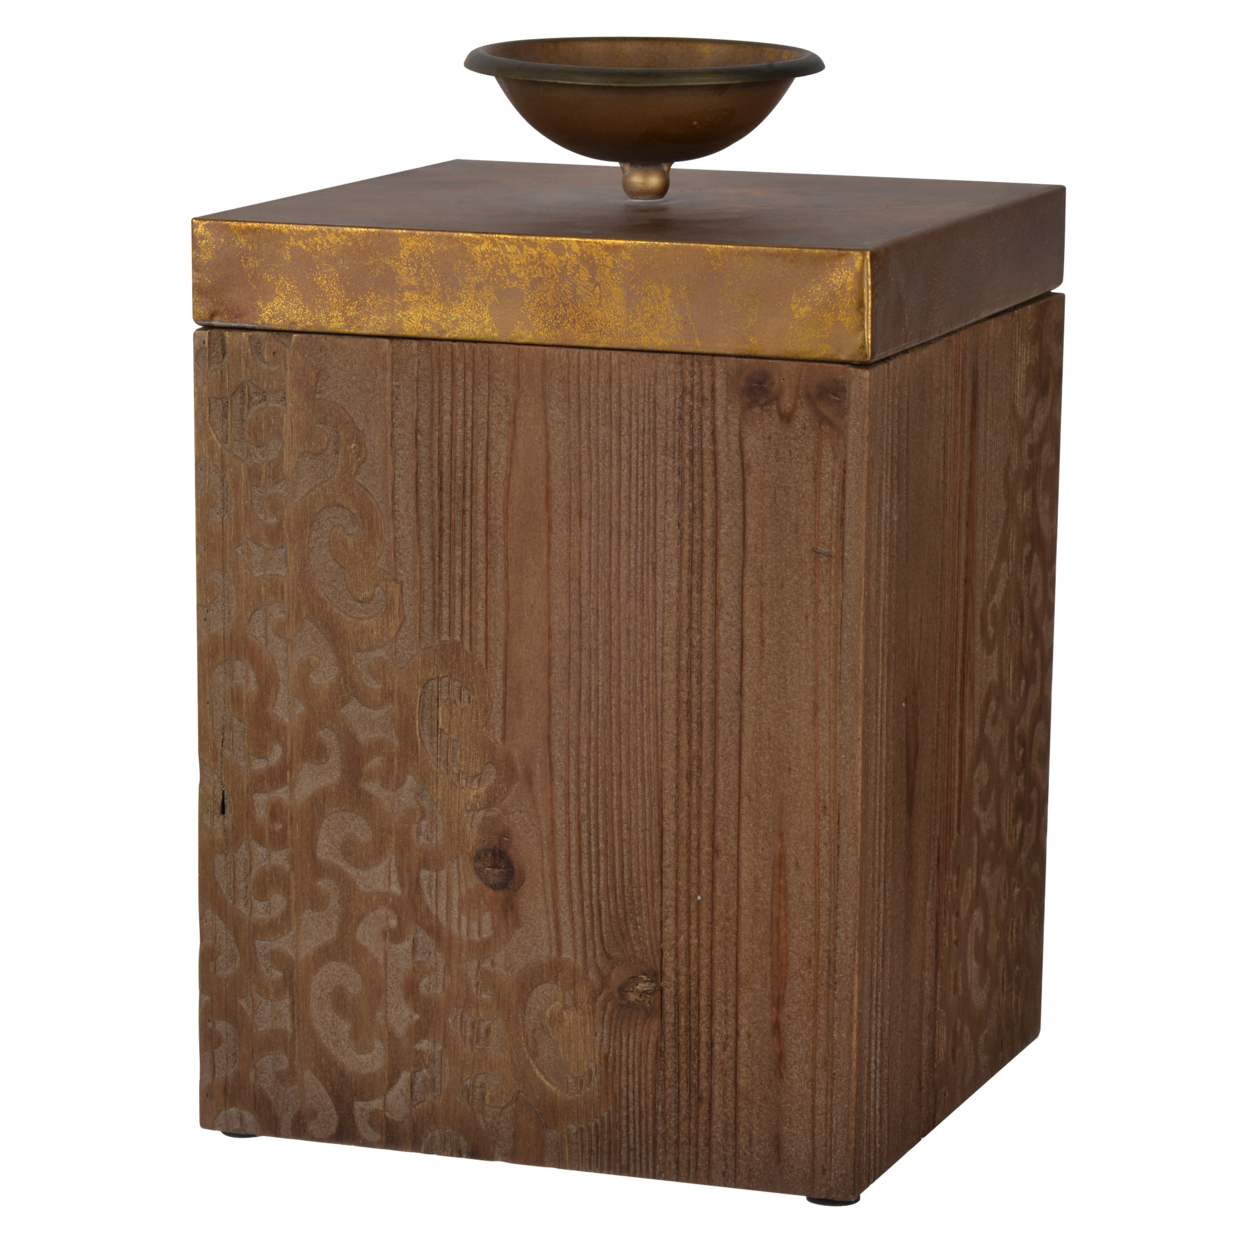 12.2 Metal And Wood Decorative Box With Unique Handle, Brown- Saltoro Sherpi